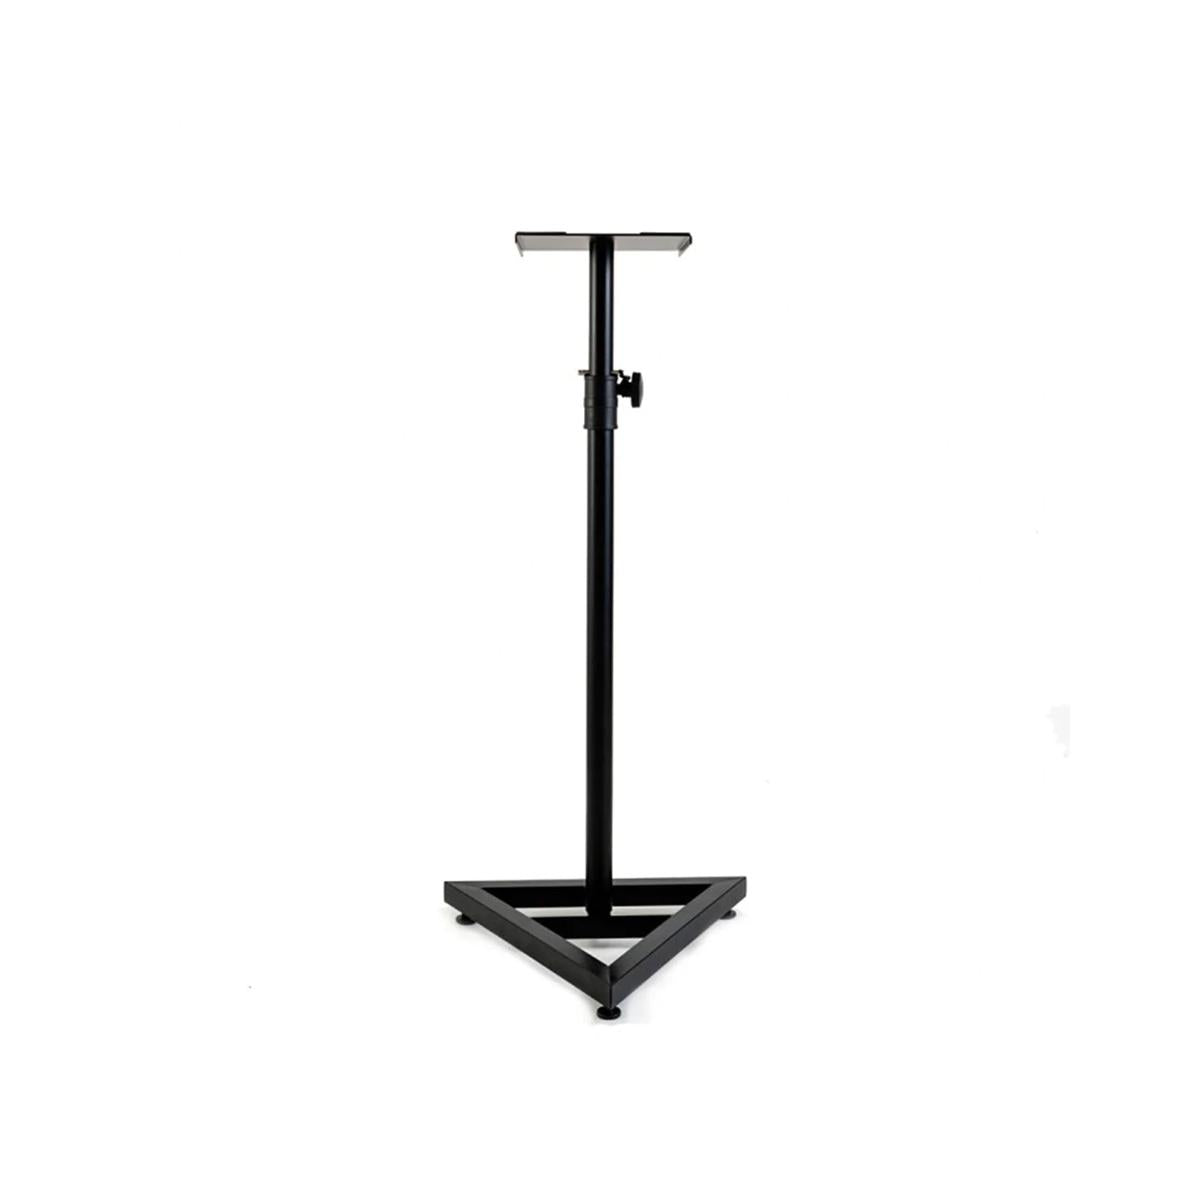 Hamilton Stands KB90A Height Adjustable Monitor Stand HA-KB90A